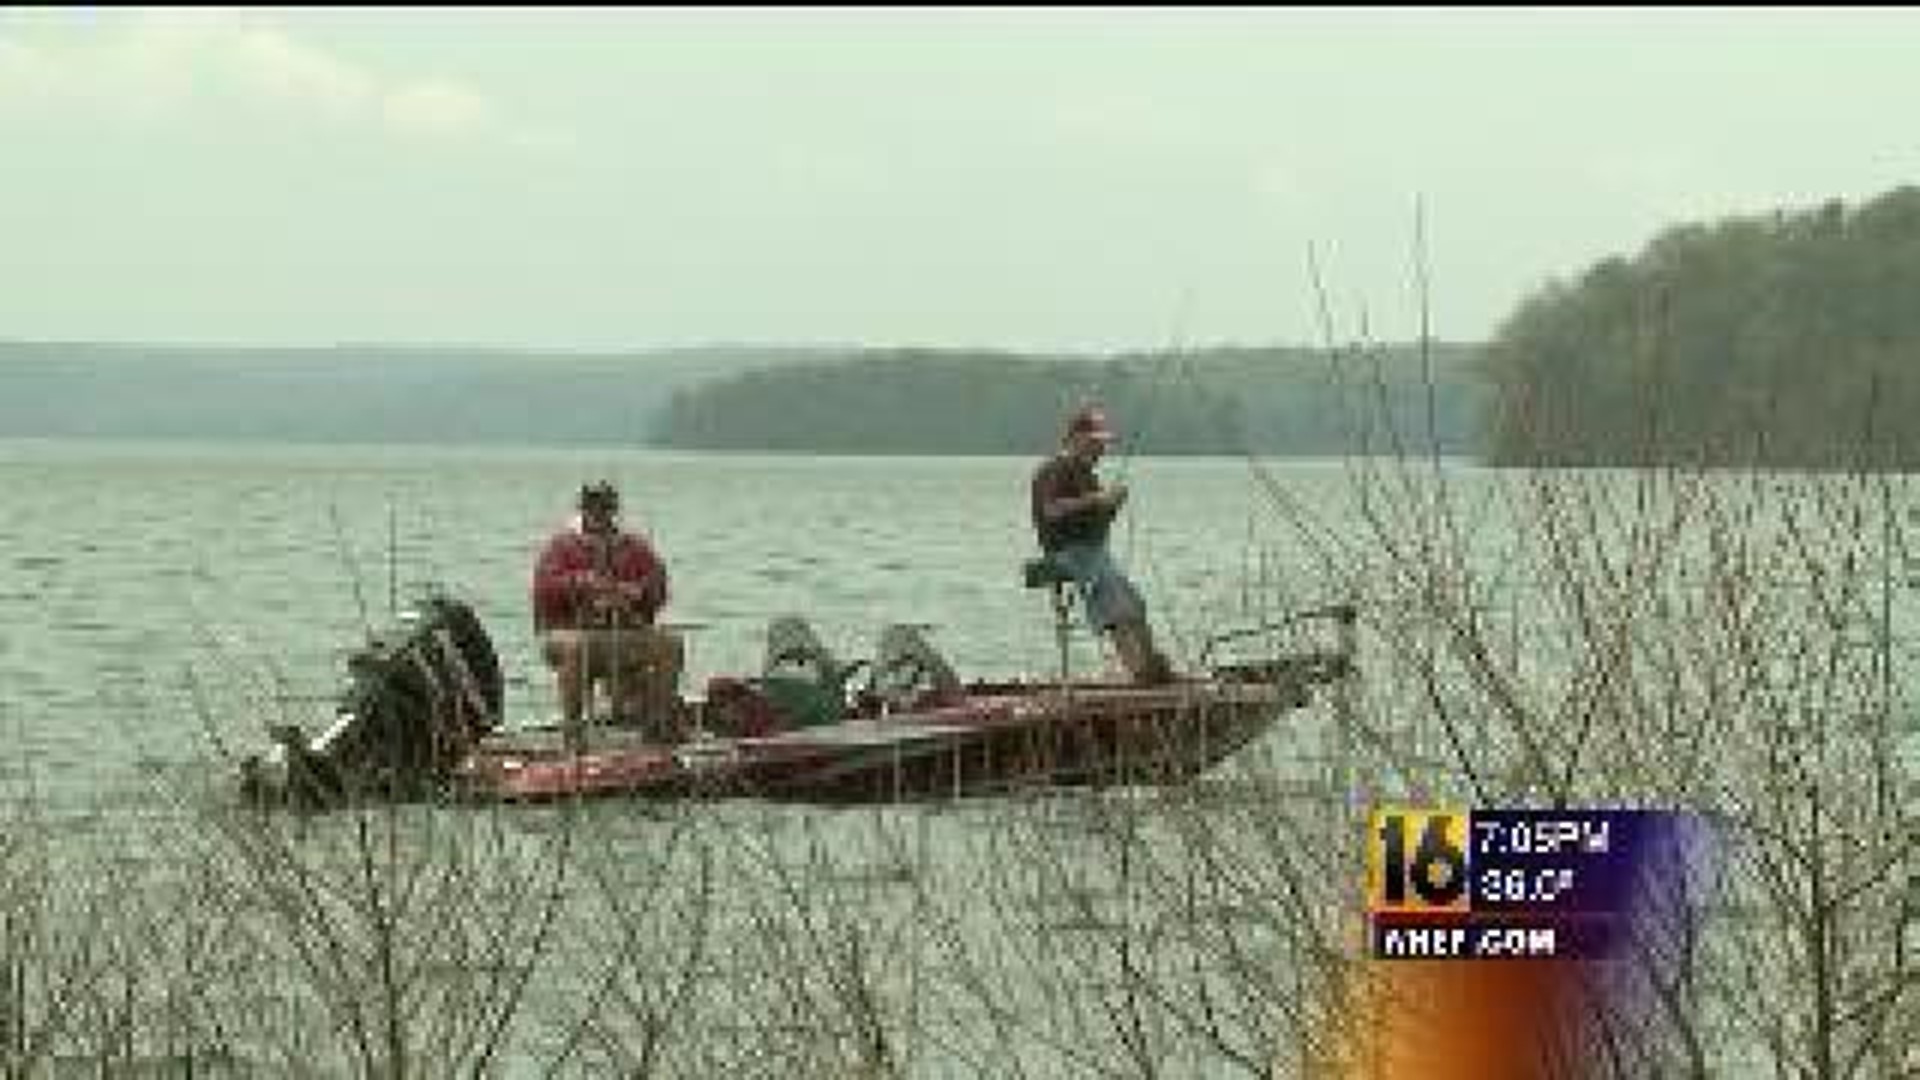 Multi-Year Fishing Licenses Available